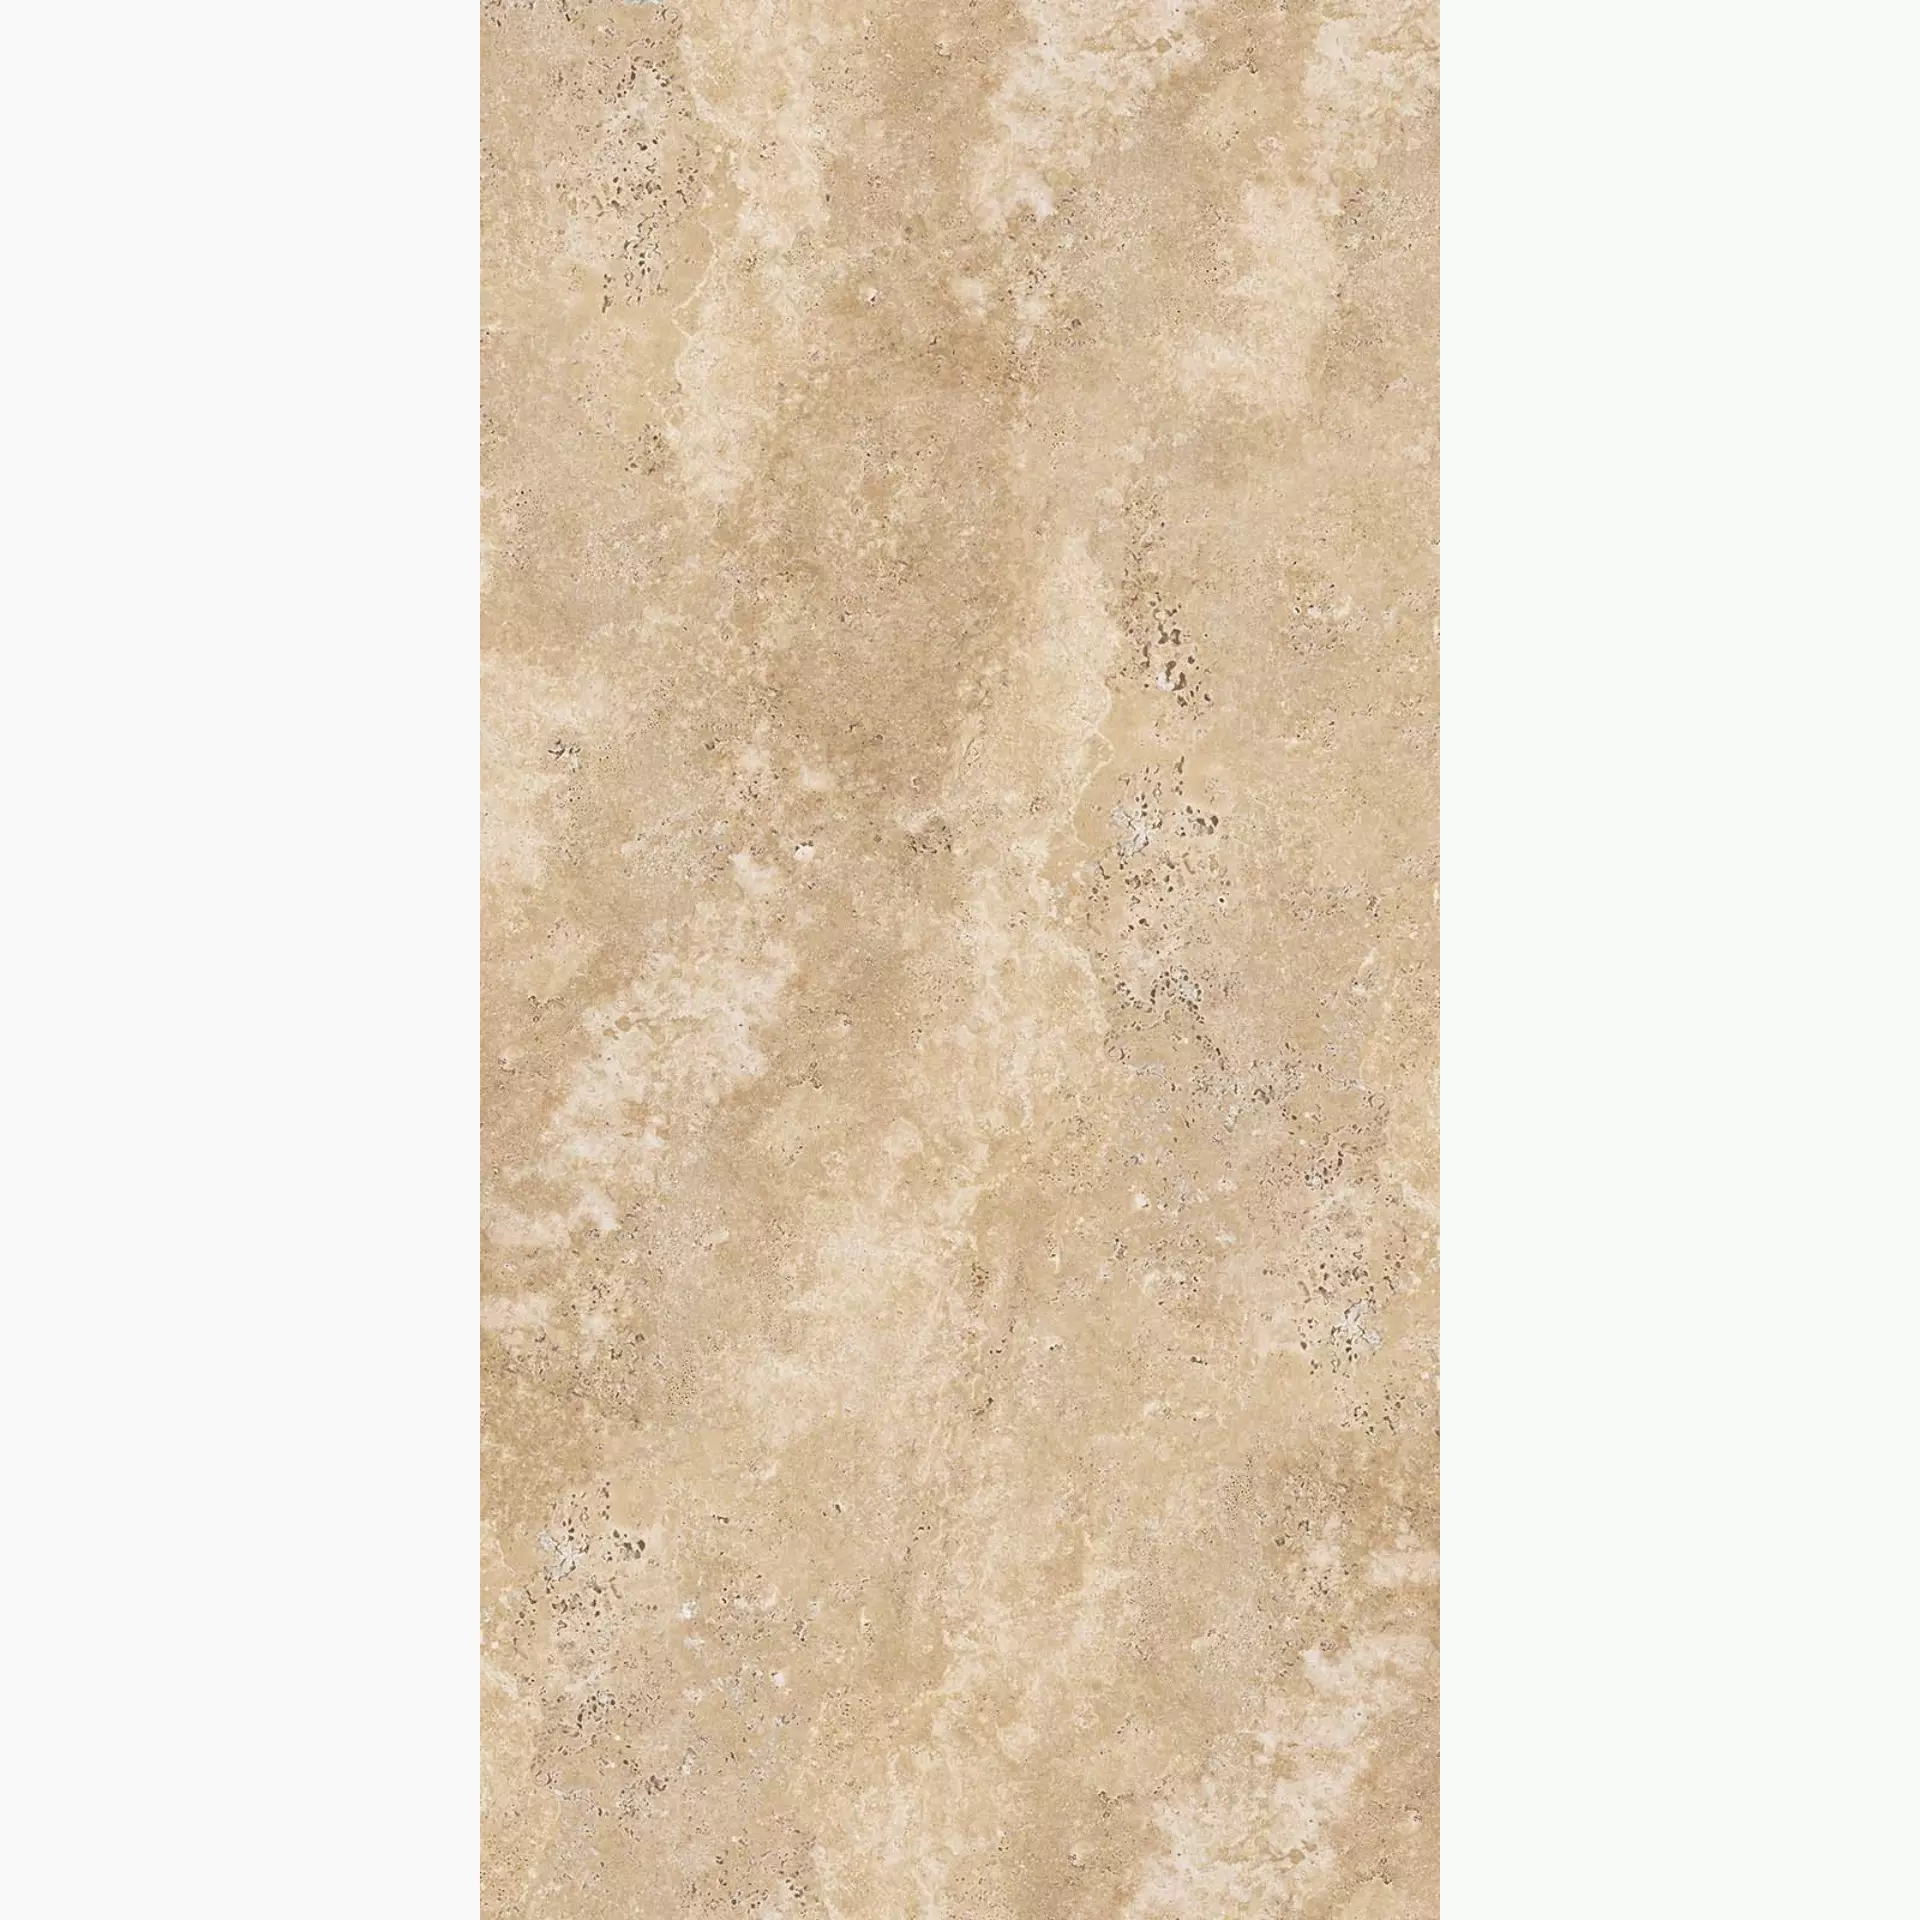 Keope Percorsi Frame Travertino Beige Spazzolato 474A3544 60x120cm rectified 9mm